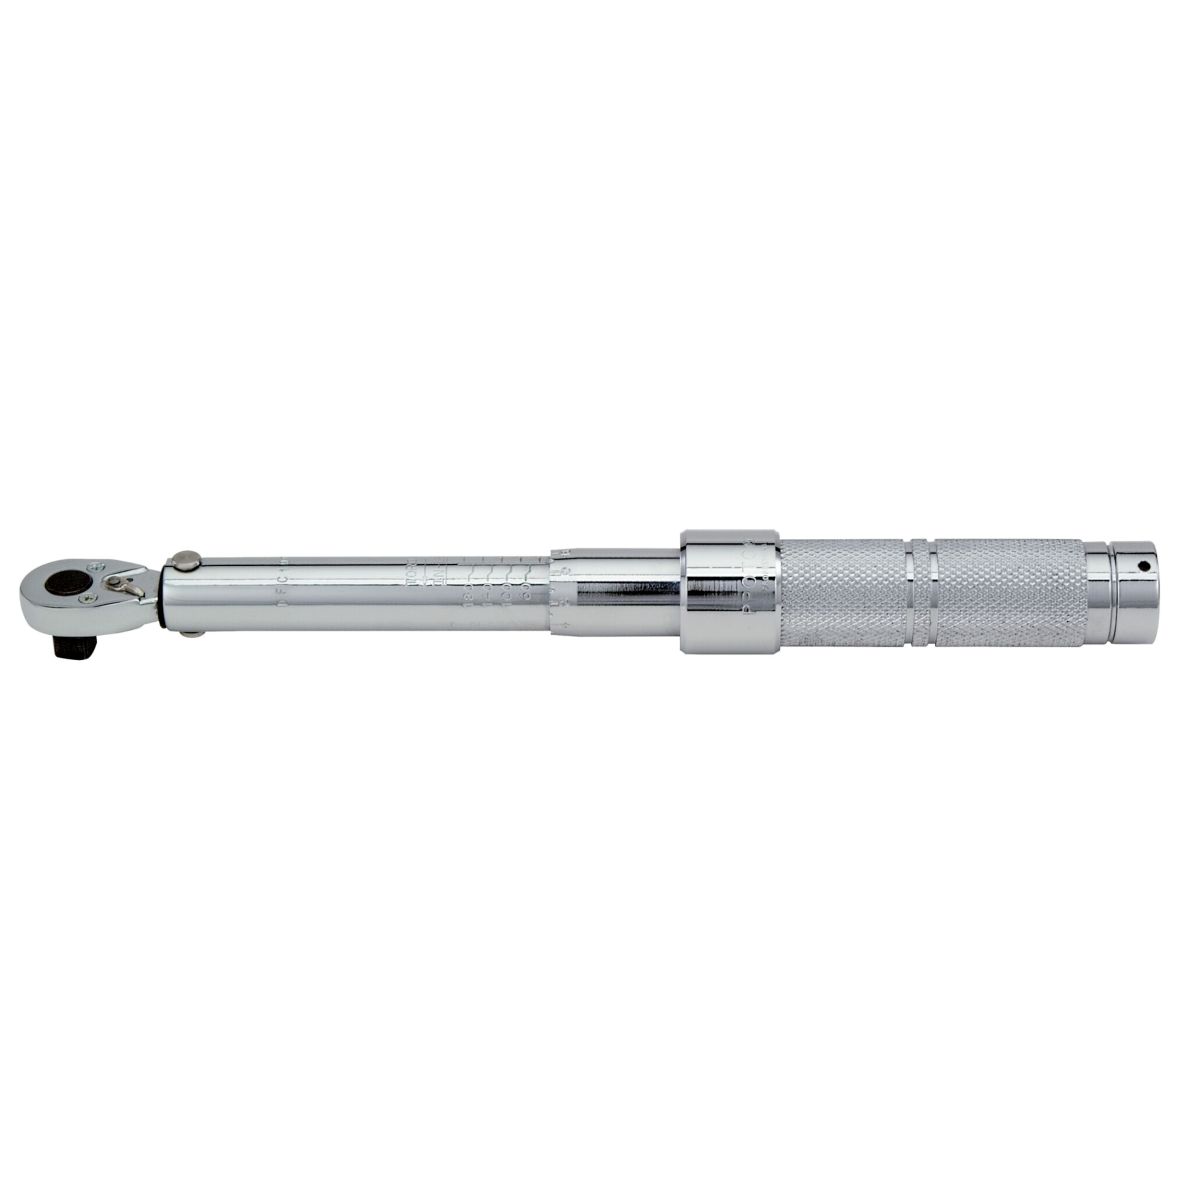 Proto 6014C 50-250 ft./lbs. Ratchet Foot Pound Torque Wrench — 1/2" Drive